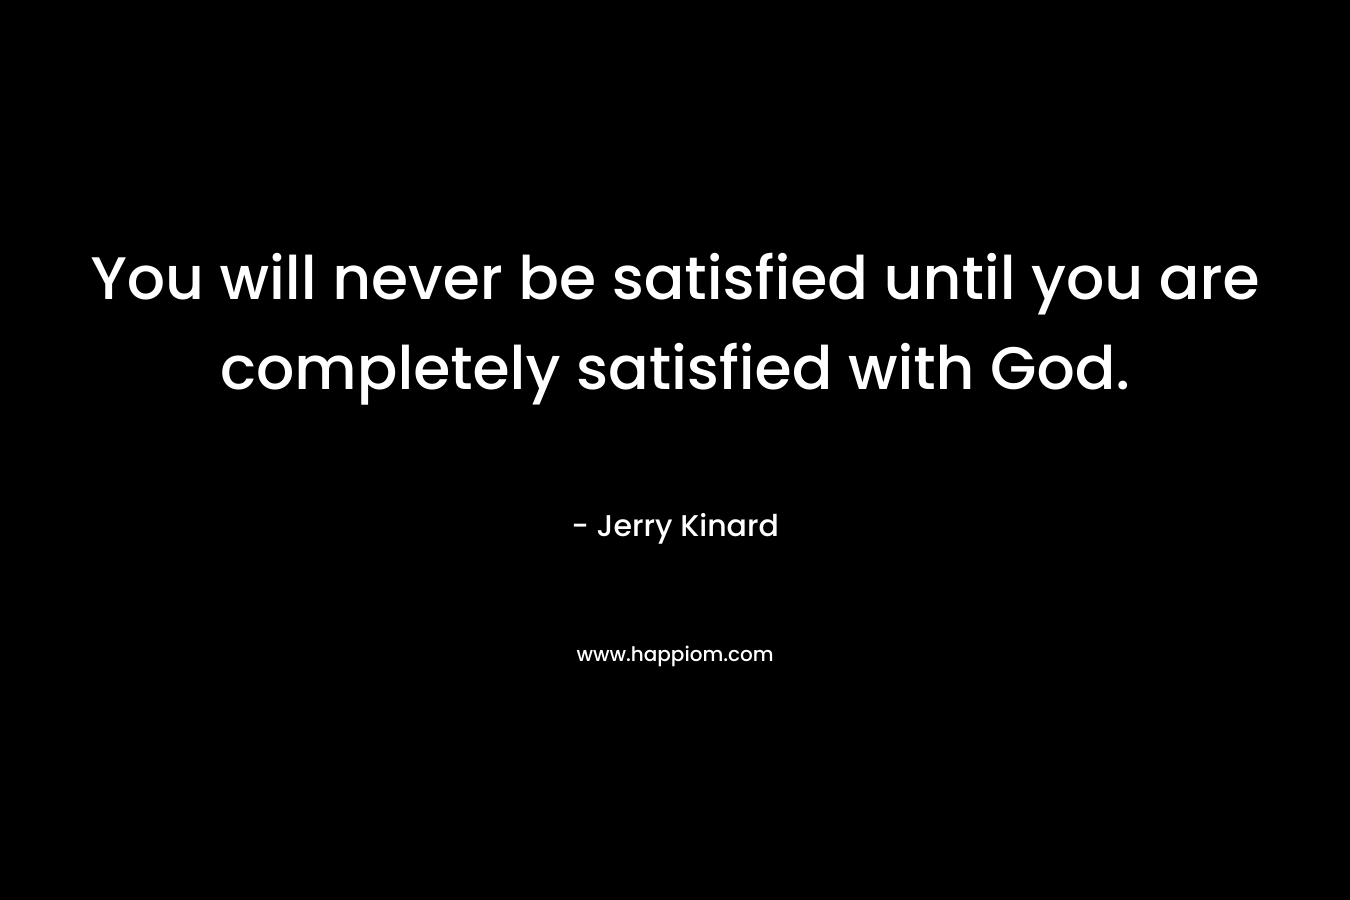 You will never be satisfied until you are completely satisfied with God.